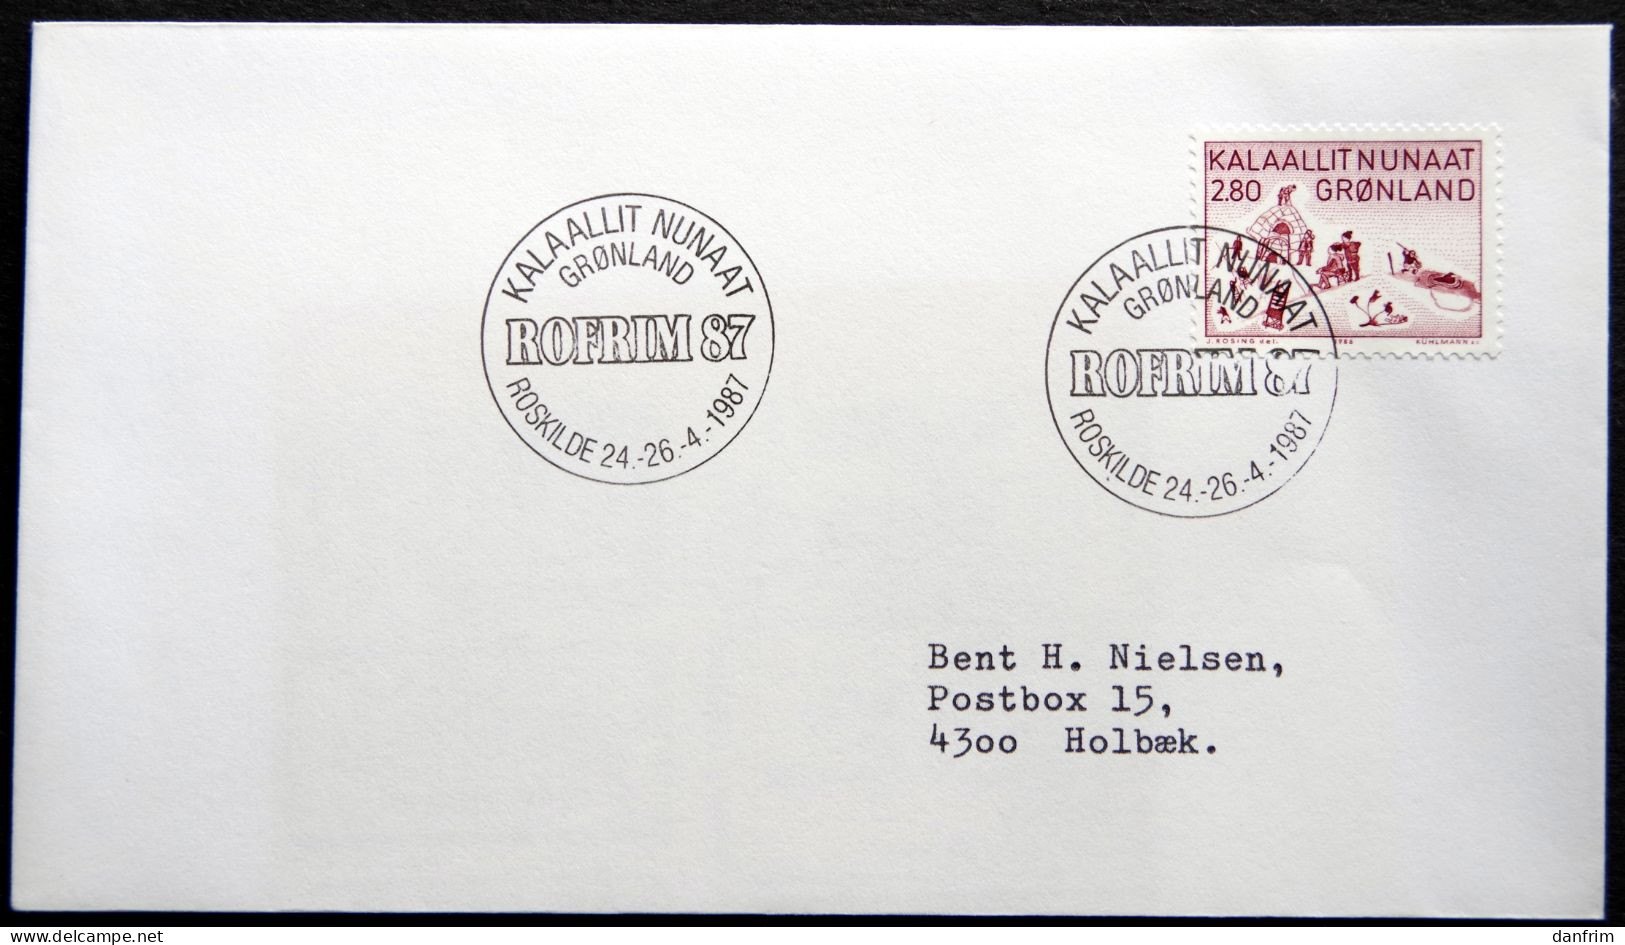 Greenland 1987 SPECIAL POSTMARKS.ROFRIM 87 ROSKILDE 24-26-4-1987 ( Lot 877 - Lettres & Documents